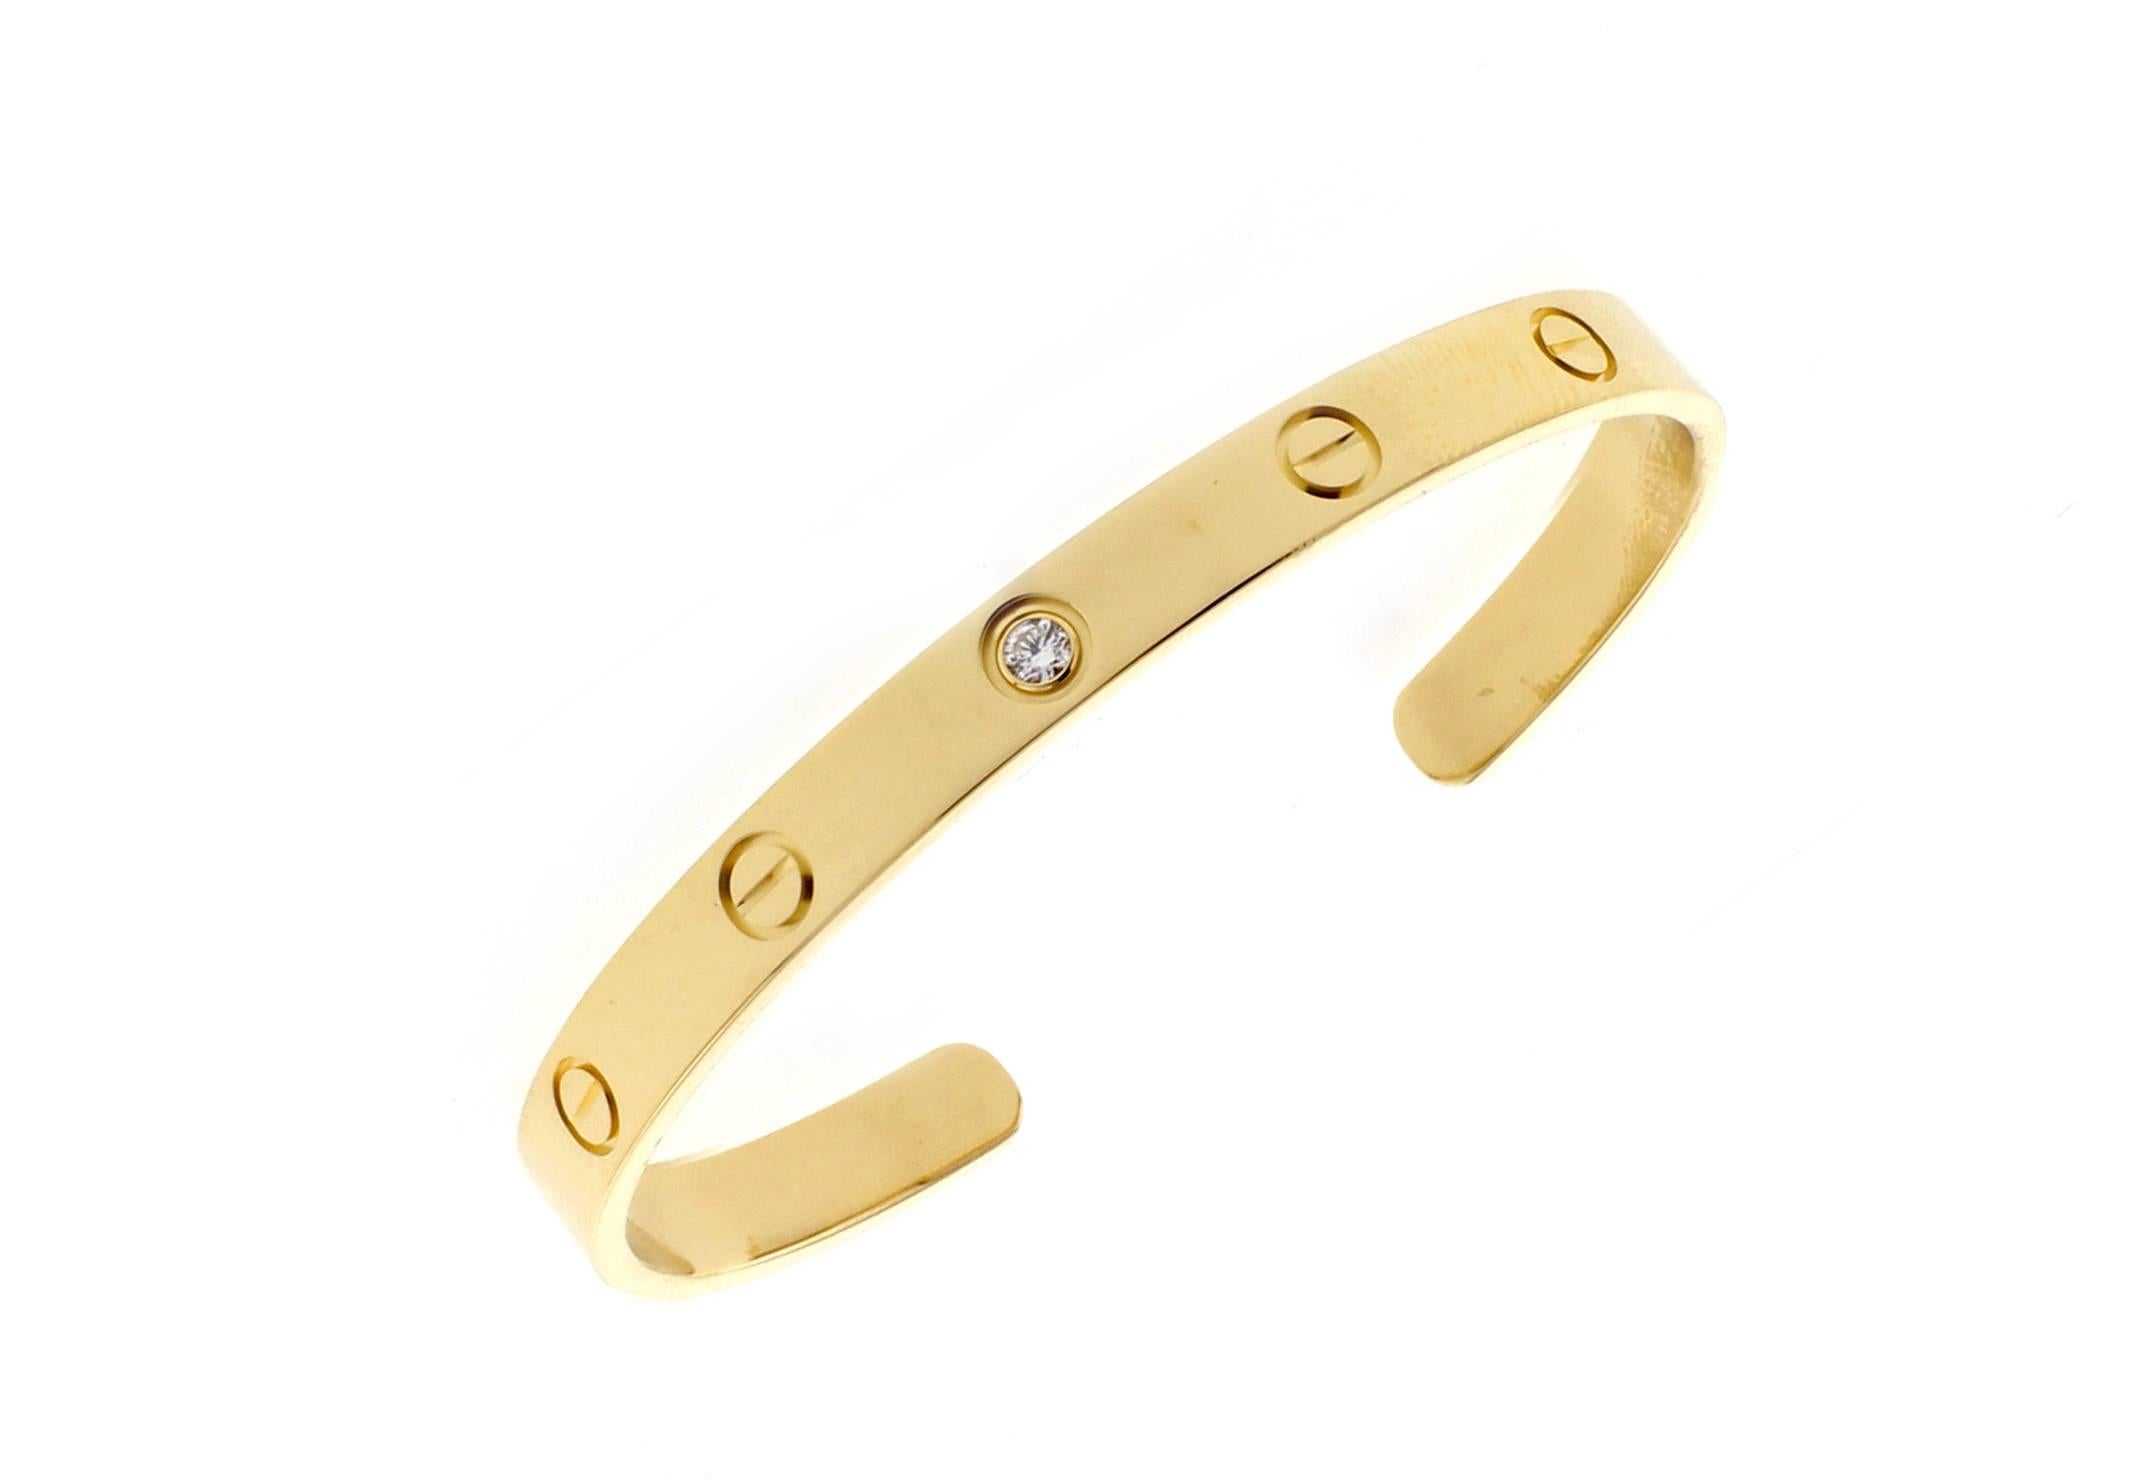 From Cartier, thier iconic love cuff. Fashioned from 18 karat gold with a single solitaire diamond. 16mm wide     Size 18   25.8grams